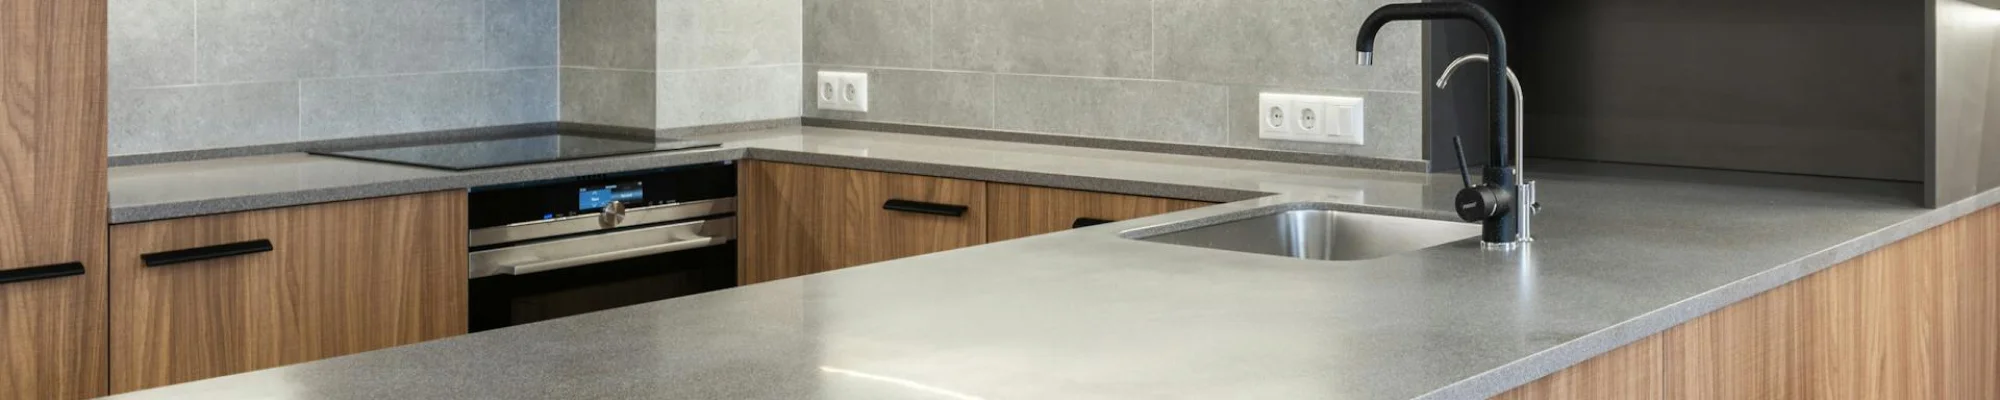 Countertop services by Family Floors & More in Elk Grove, CA